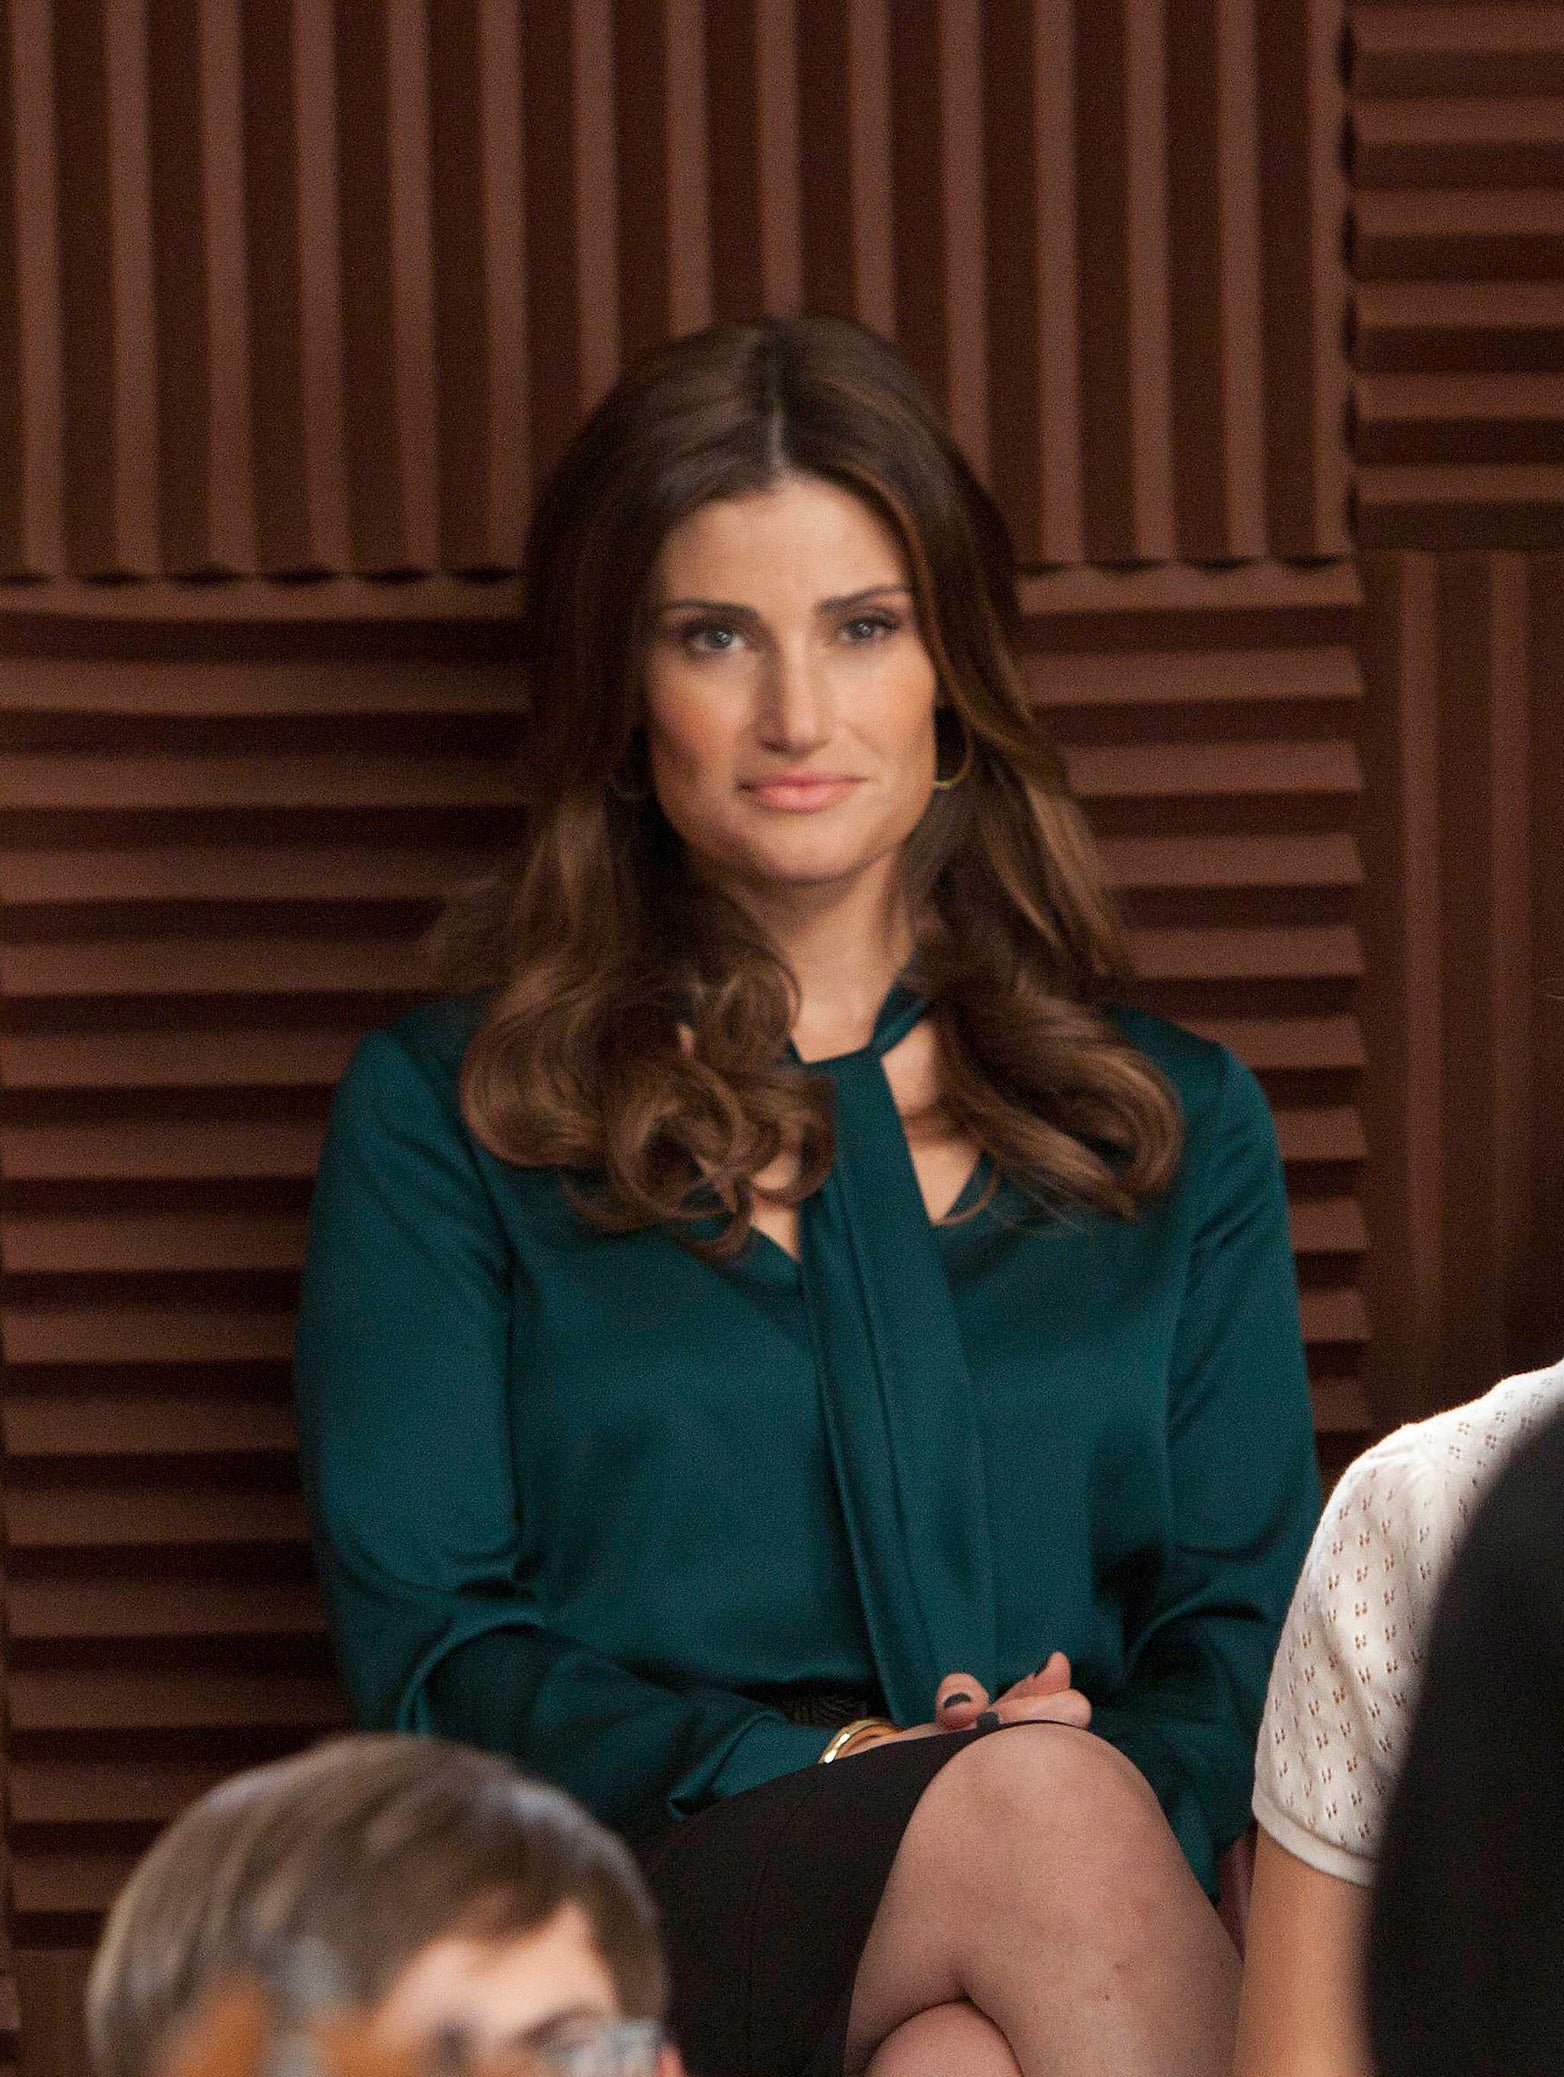 Idina sitting in the stands in the series